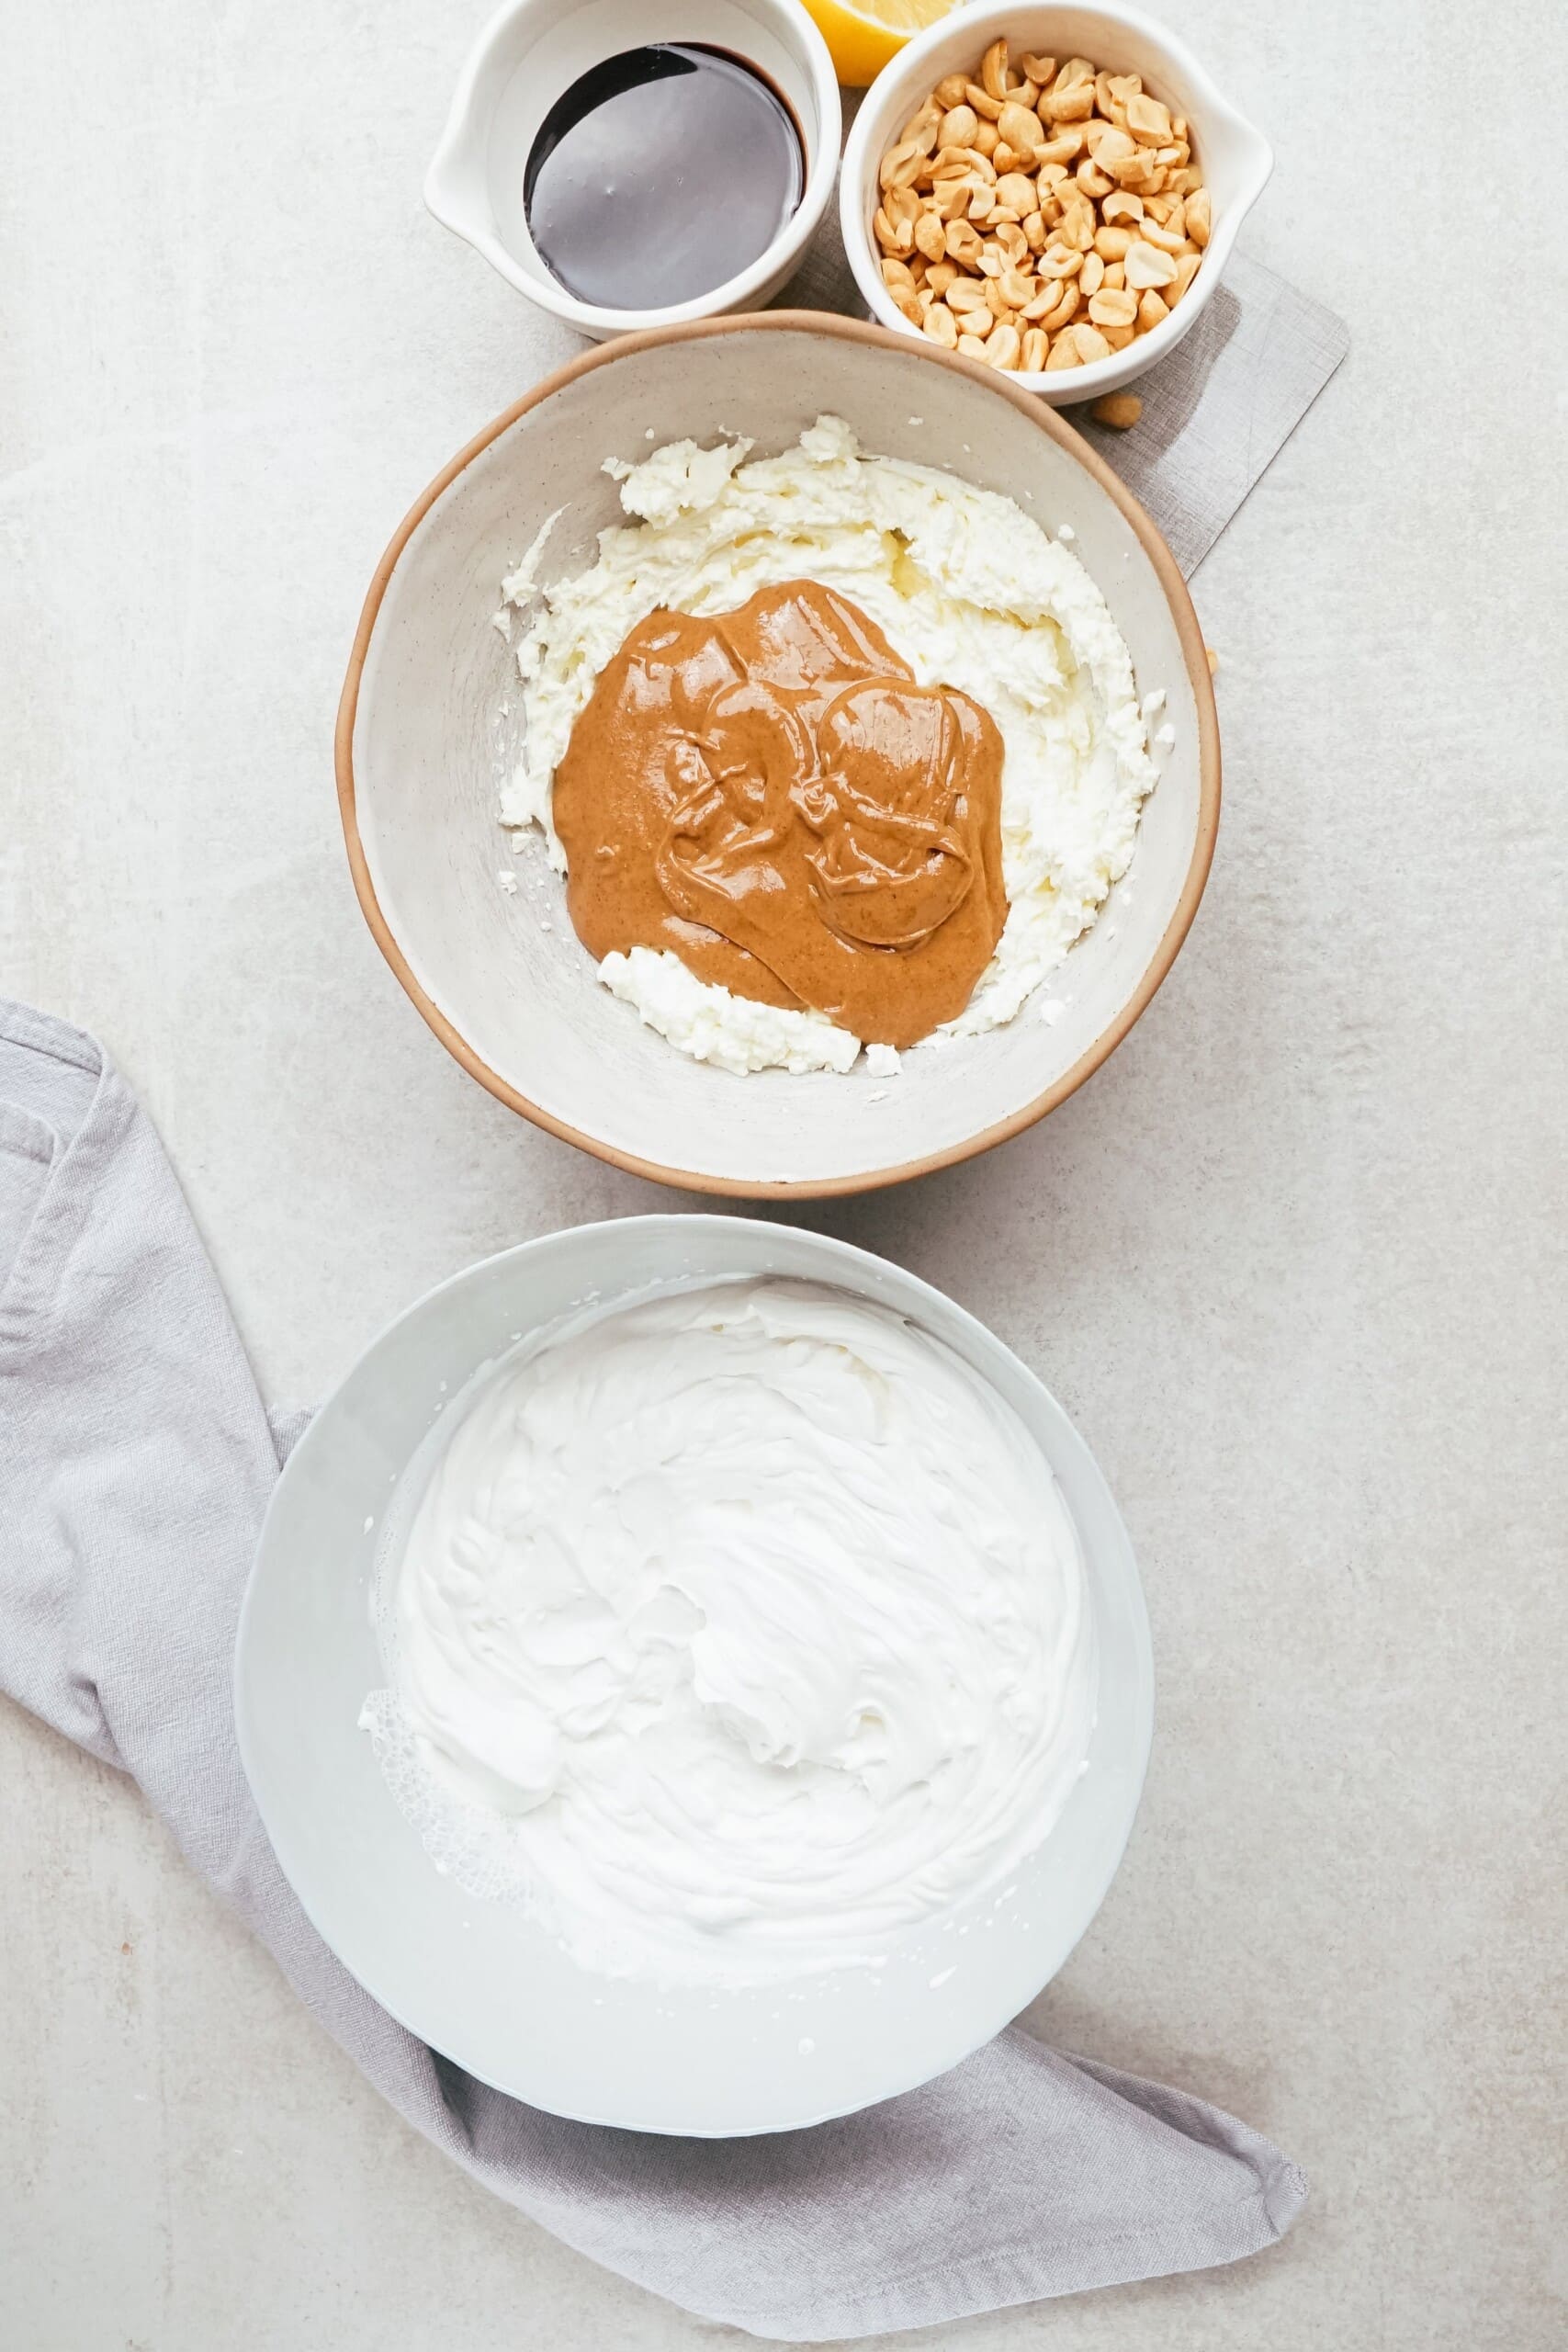 whipped cream in one bowl, cream cheese and pb in the other bowl